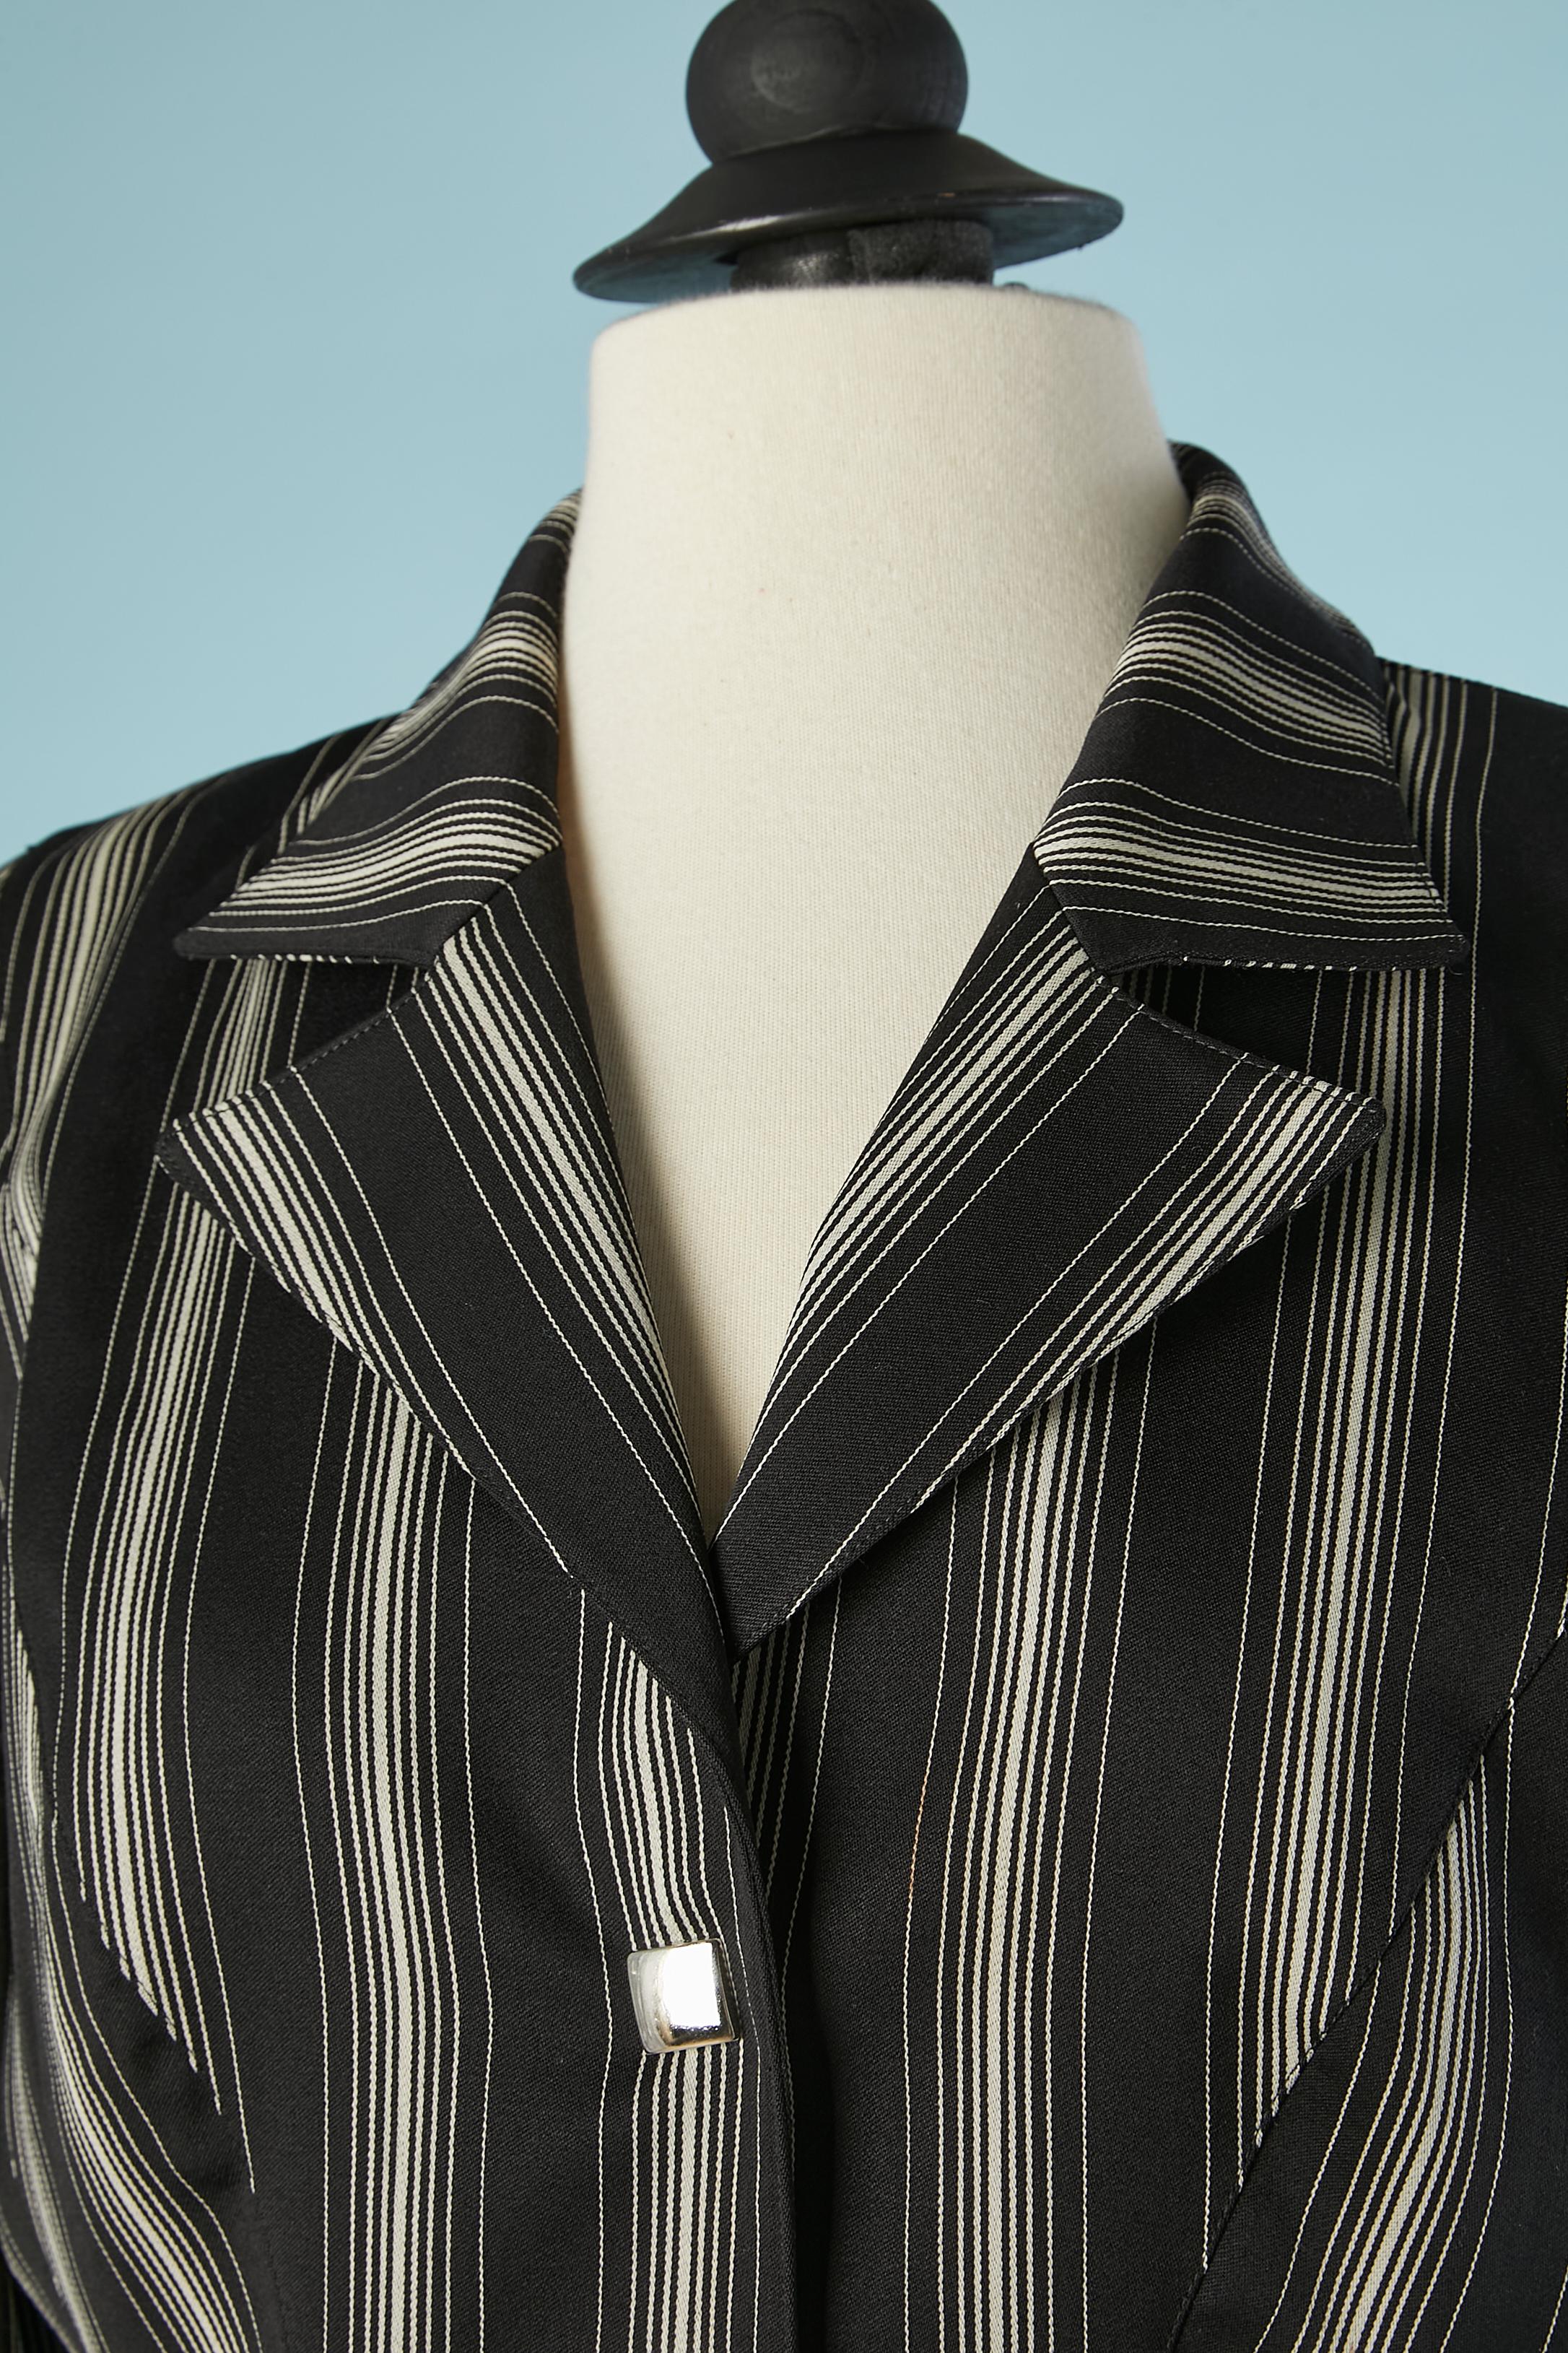 Black and white striped single breasted jacket. Metal silver snap in the middle front. Shoulder-pad. 
SIZE L